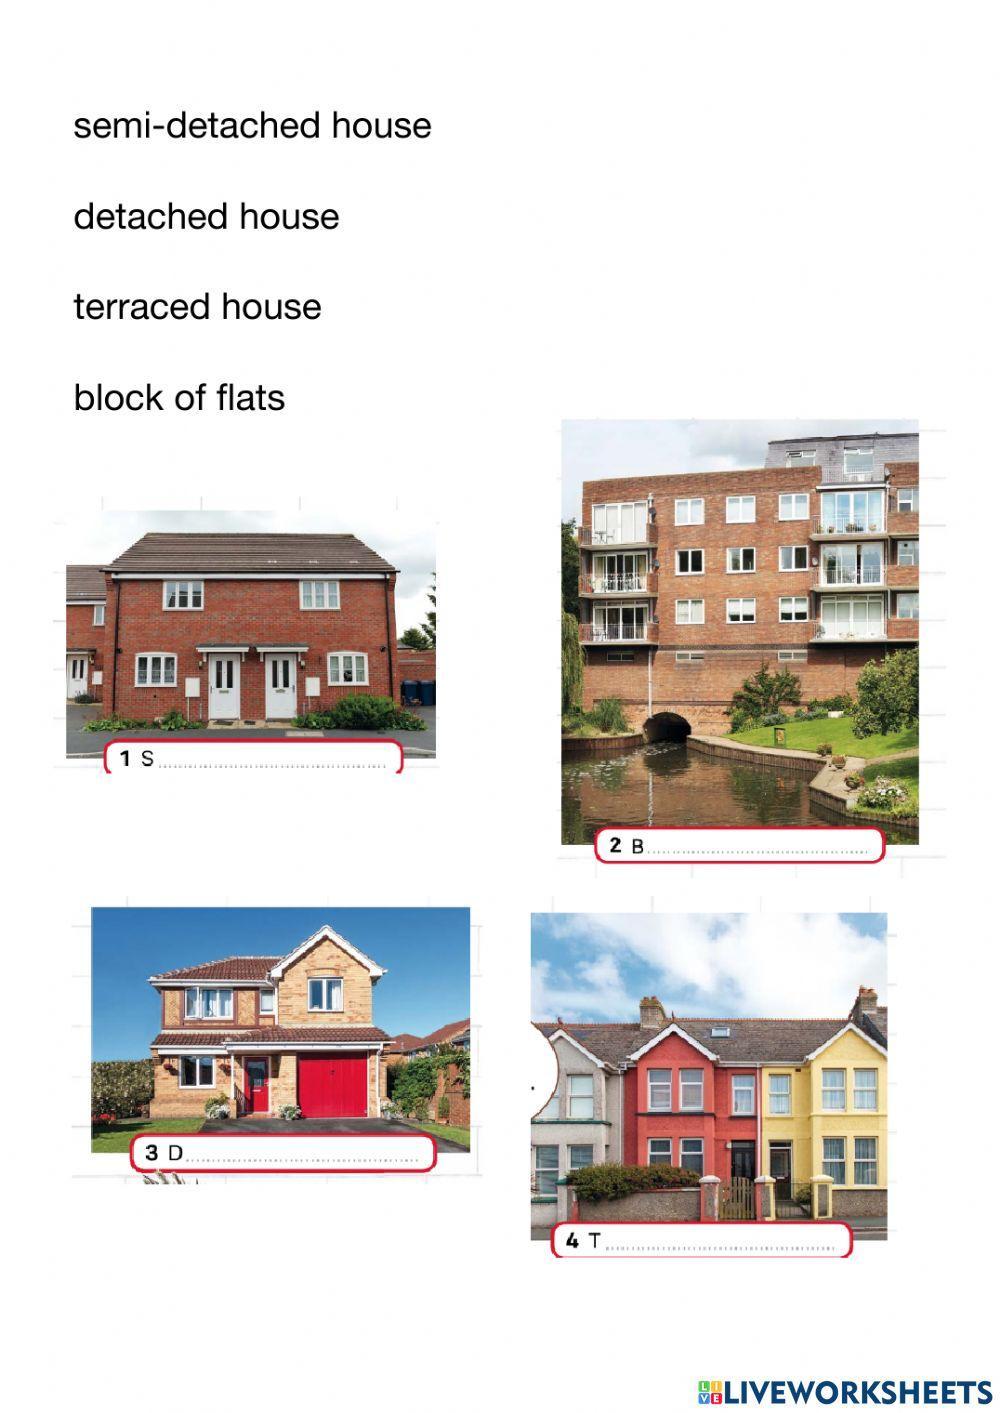 Types of house in Britain